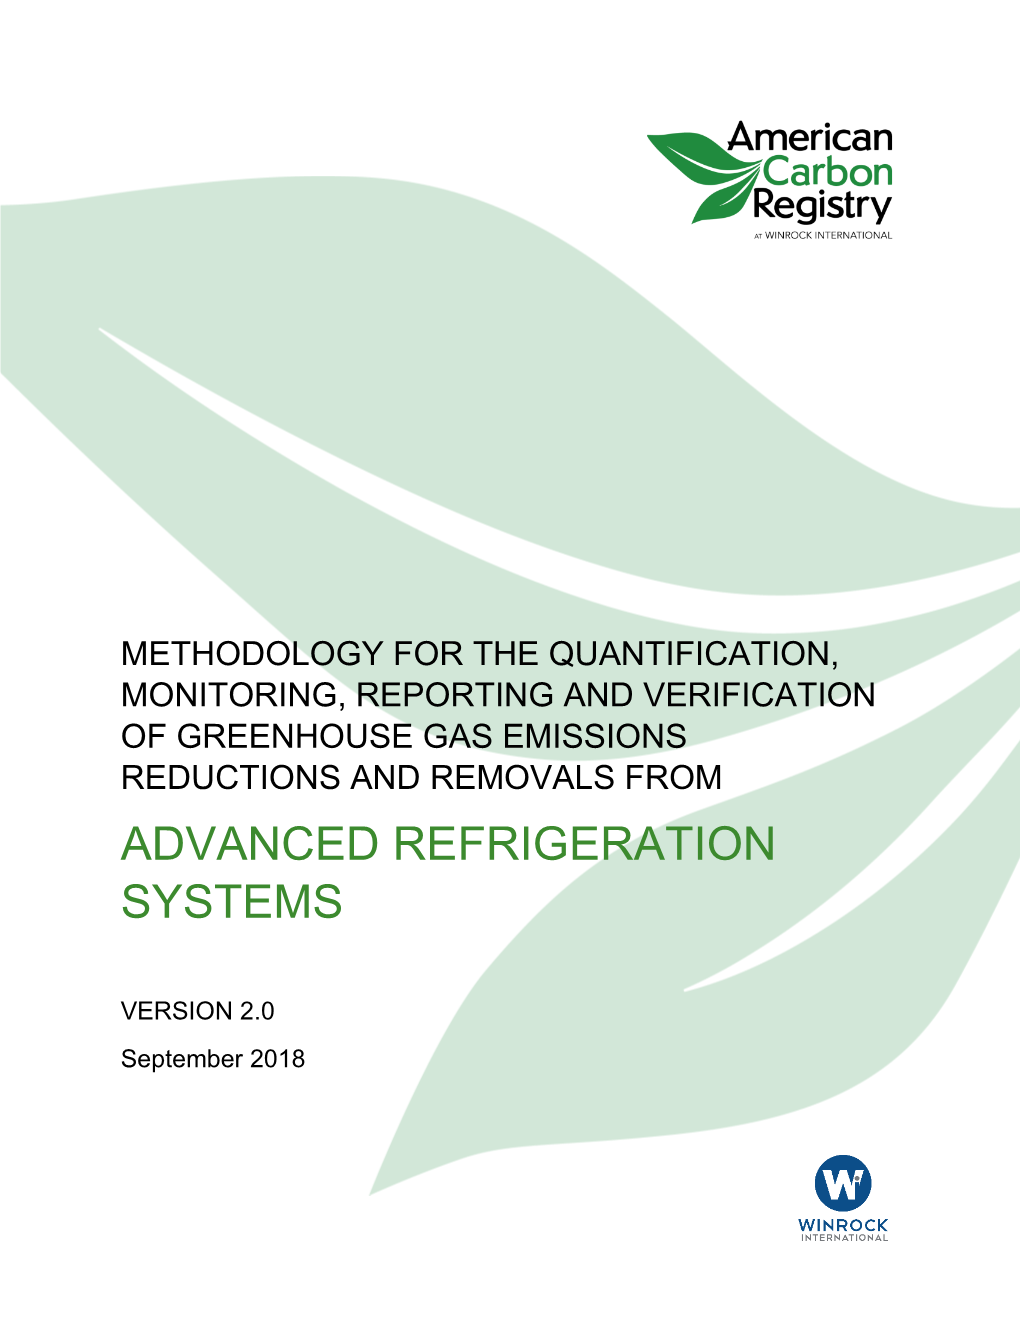 Methodology for the Quantification, Monitoring, Reporting and Verification of Greenhouse Gas Emissions Reductions and Removals from Advanced Refrigeration Systems